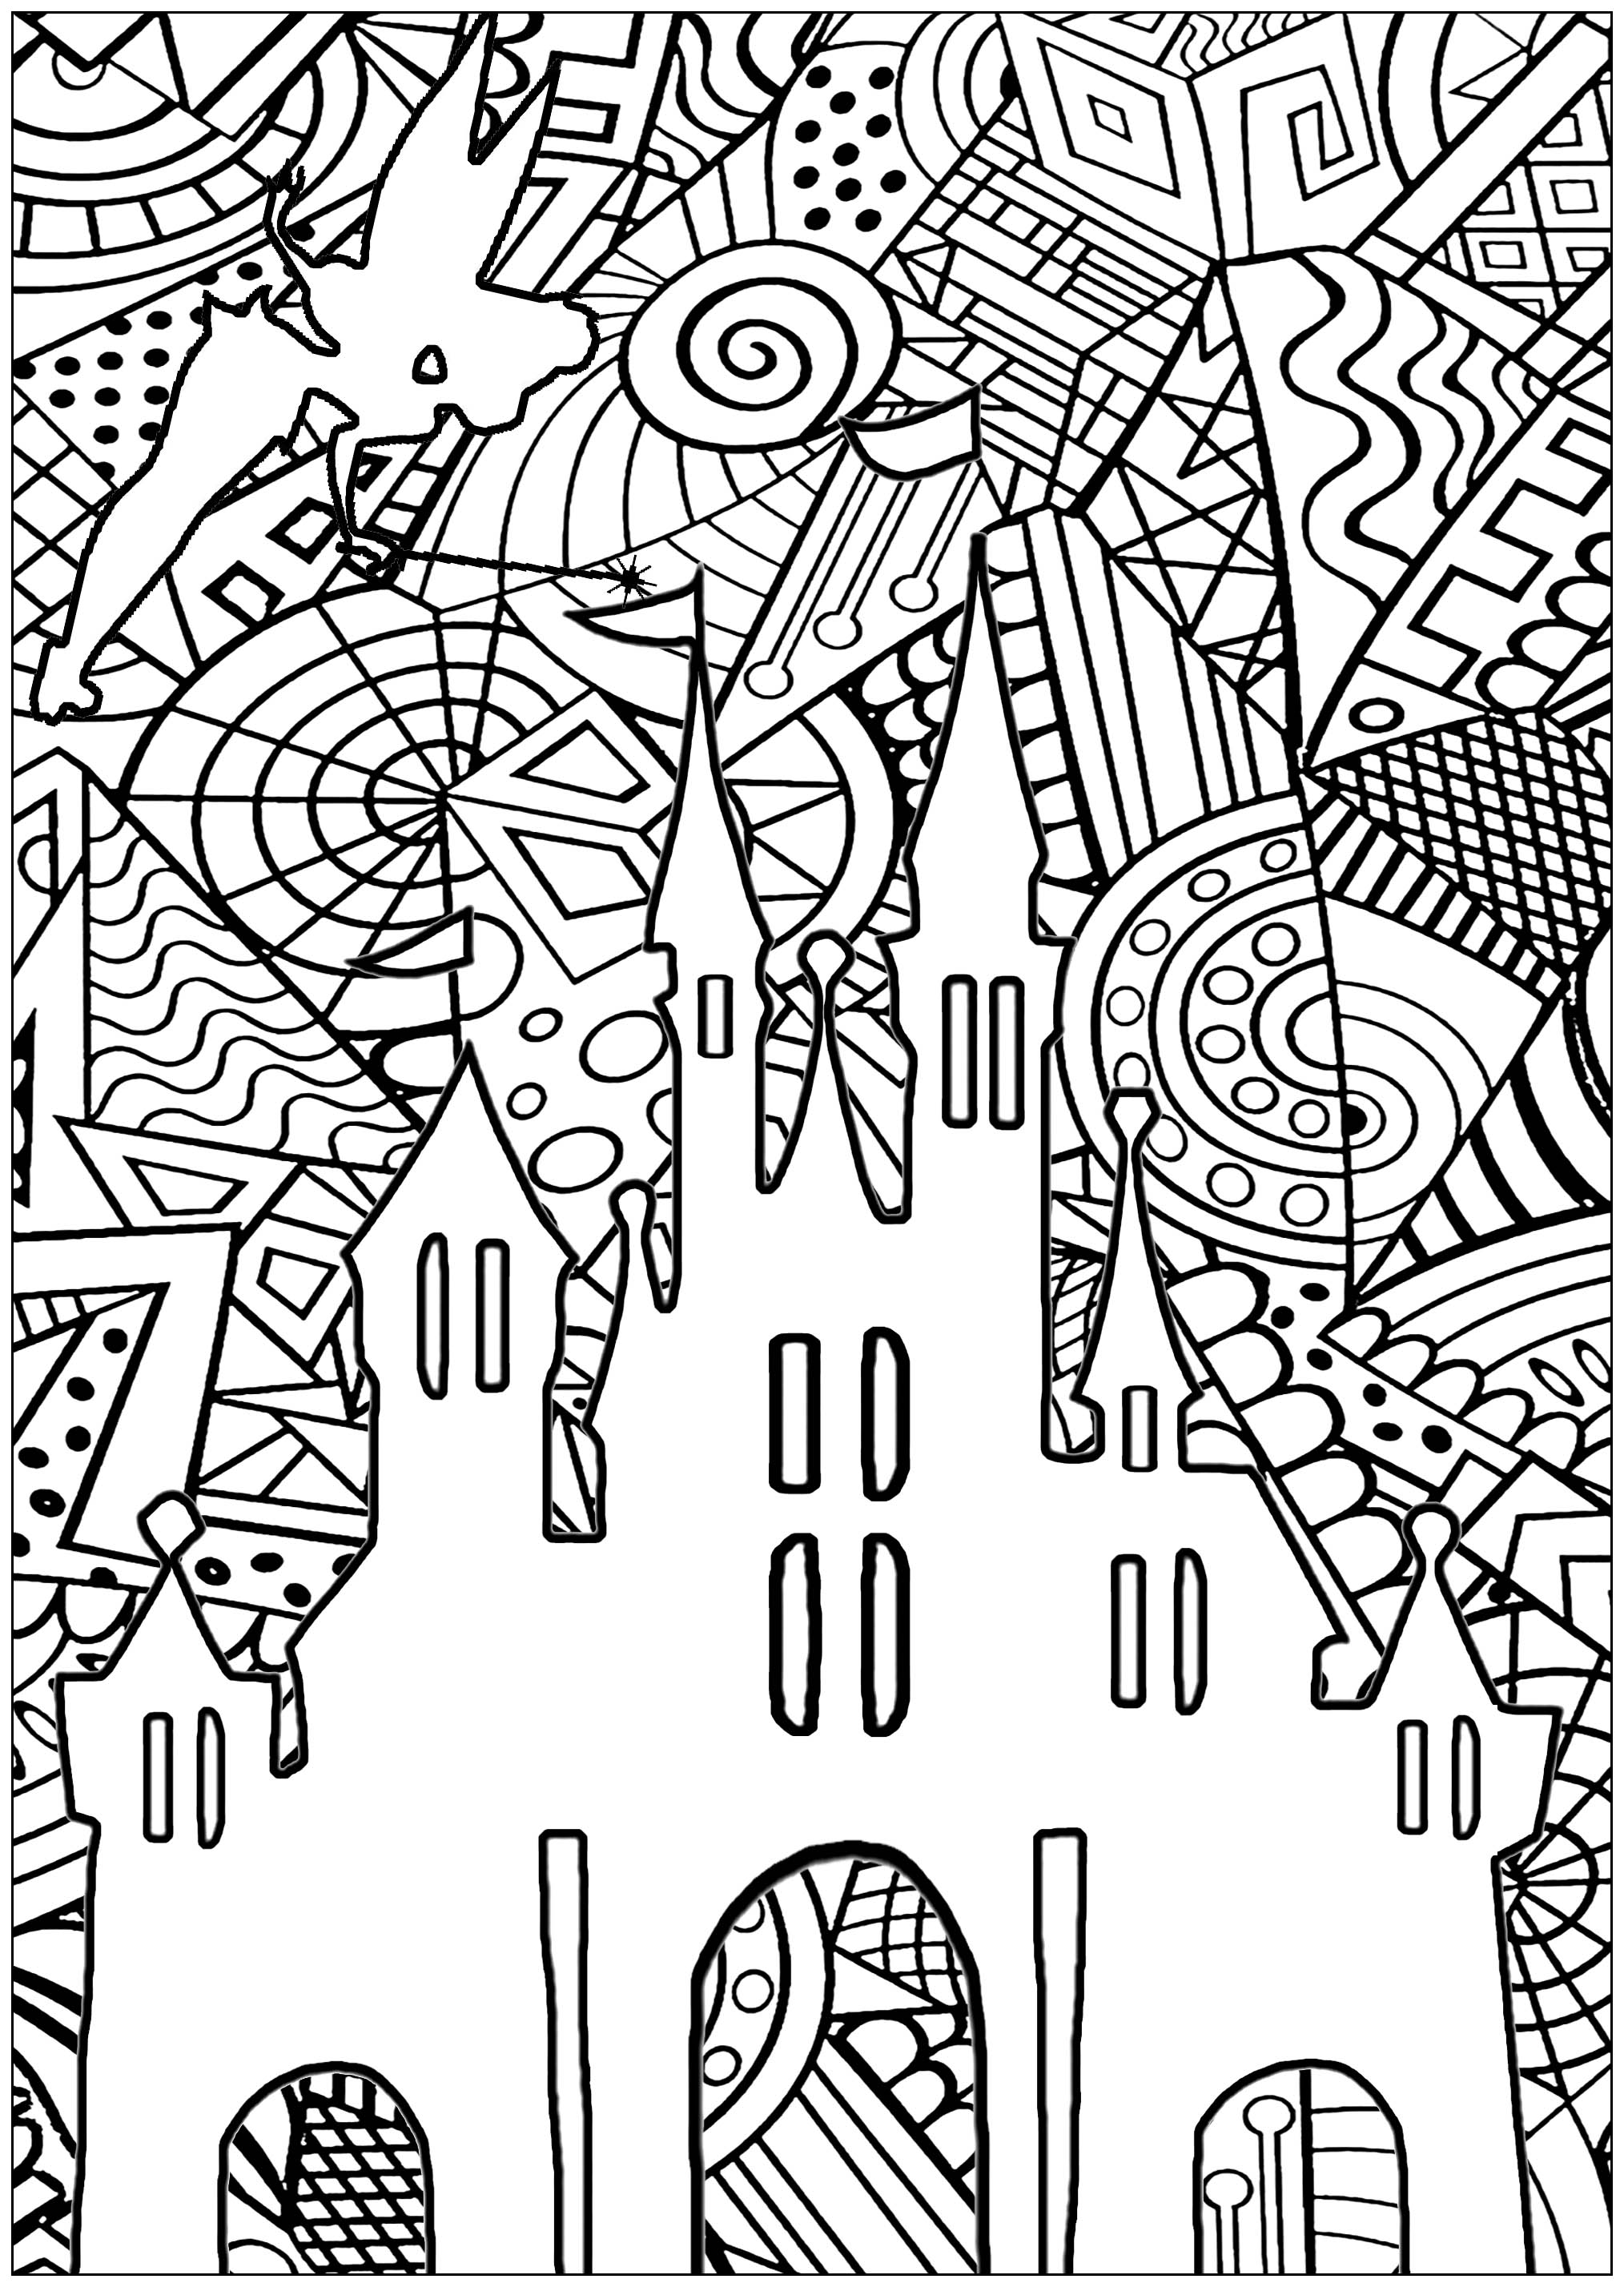 Download Disney - Coloring Pages for Adults